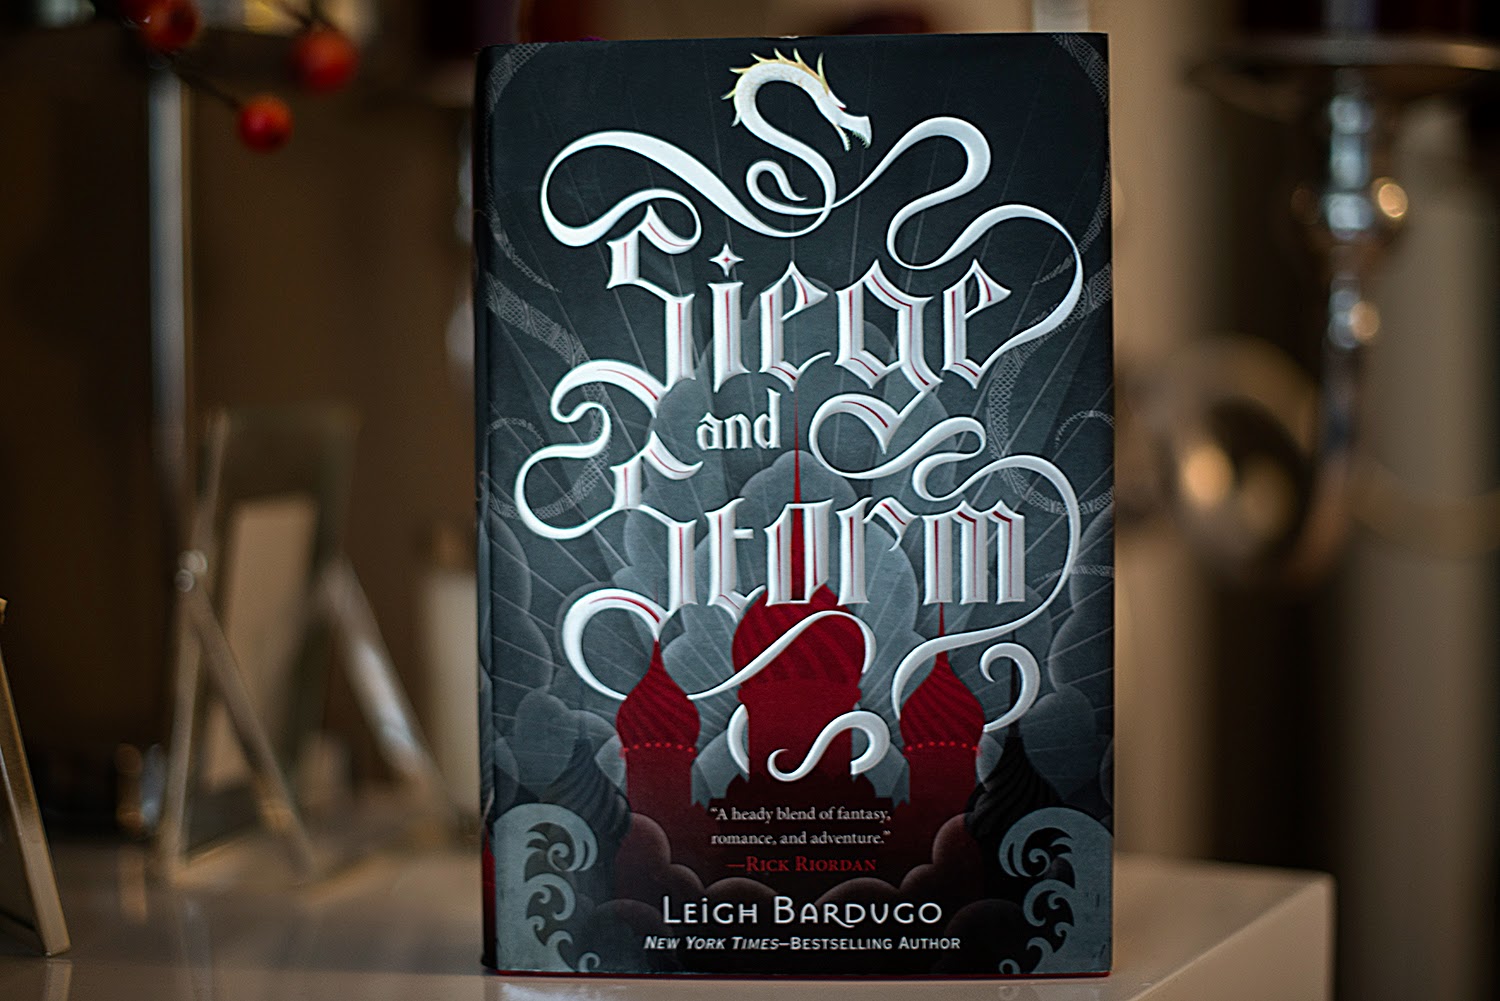 Alina of the Grisha Trilogy by Leigh Bardugo. (Shadow and Bone, Siege and  Storm, Ruin and Rising)